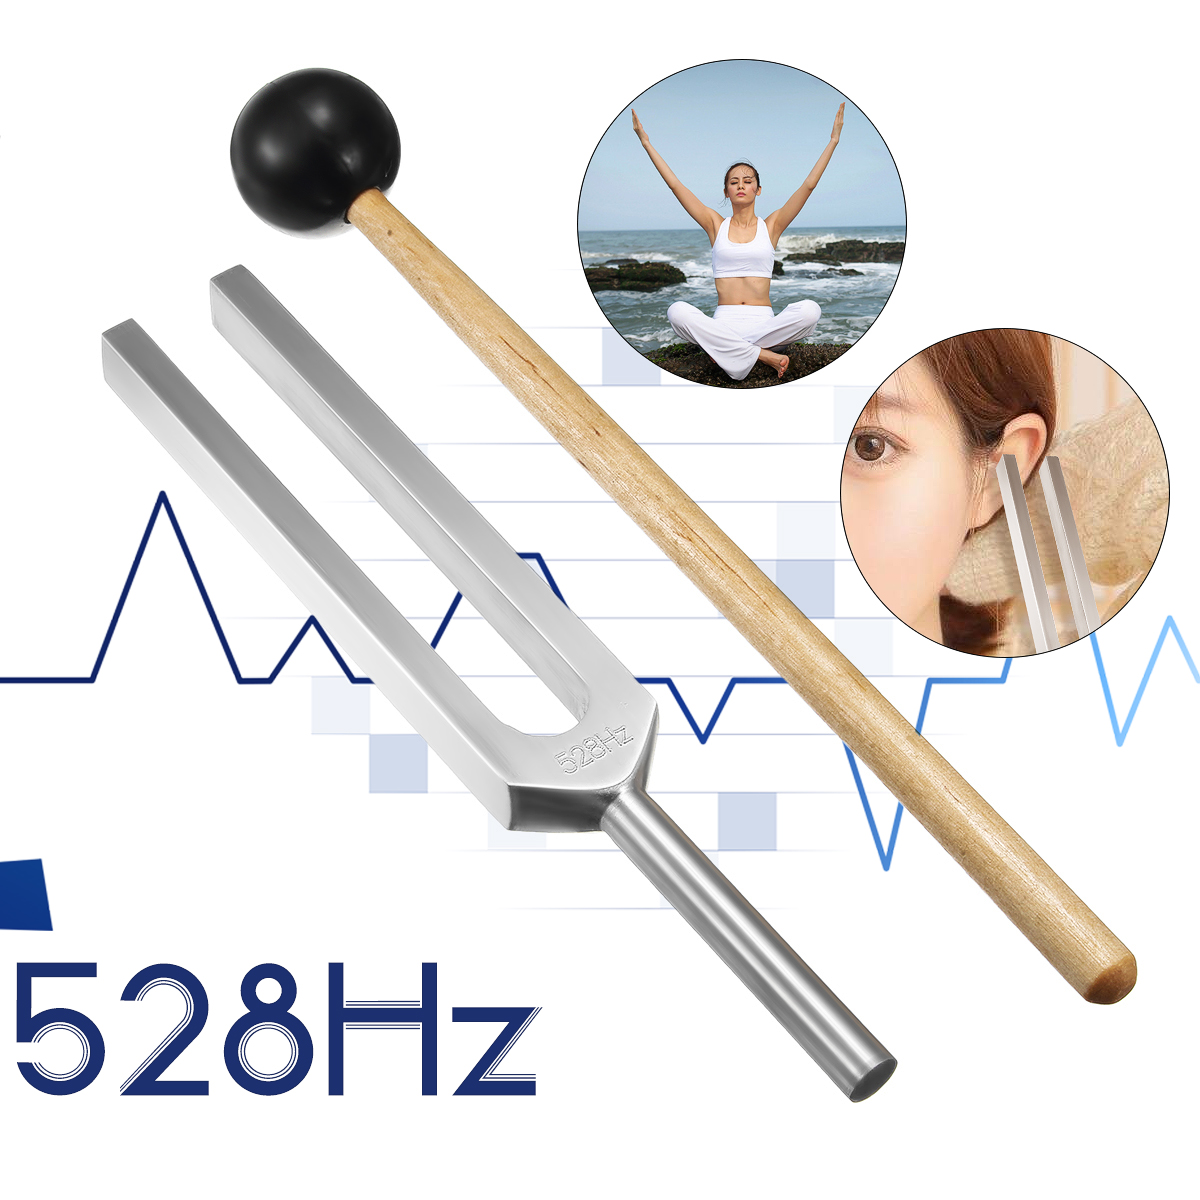 528Hz-Medical-Tuning-Fork-Chakra-Hammer-Sound-Healing-Therapy-Diagnostic-with-Mallet-1310034-1